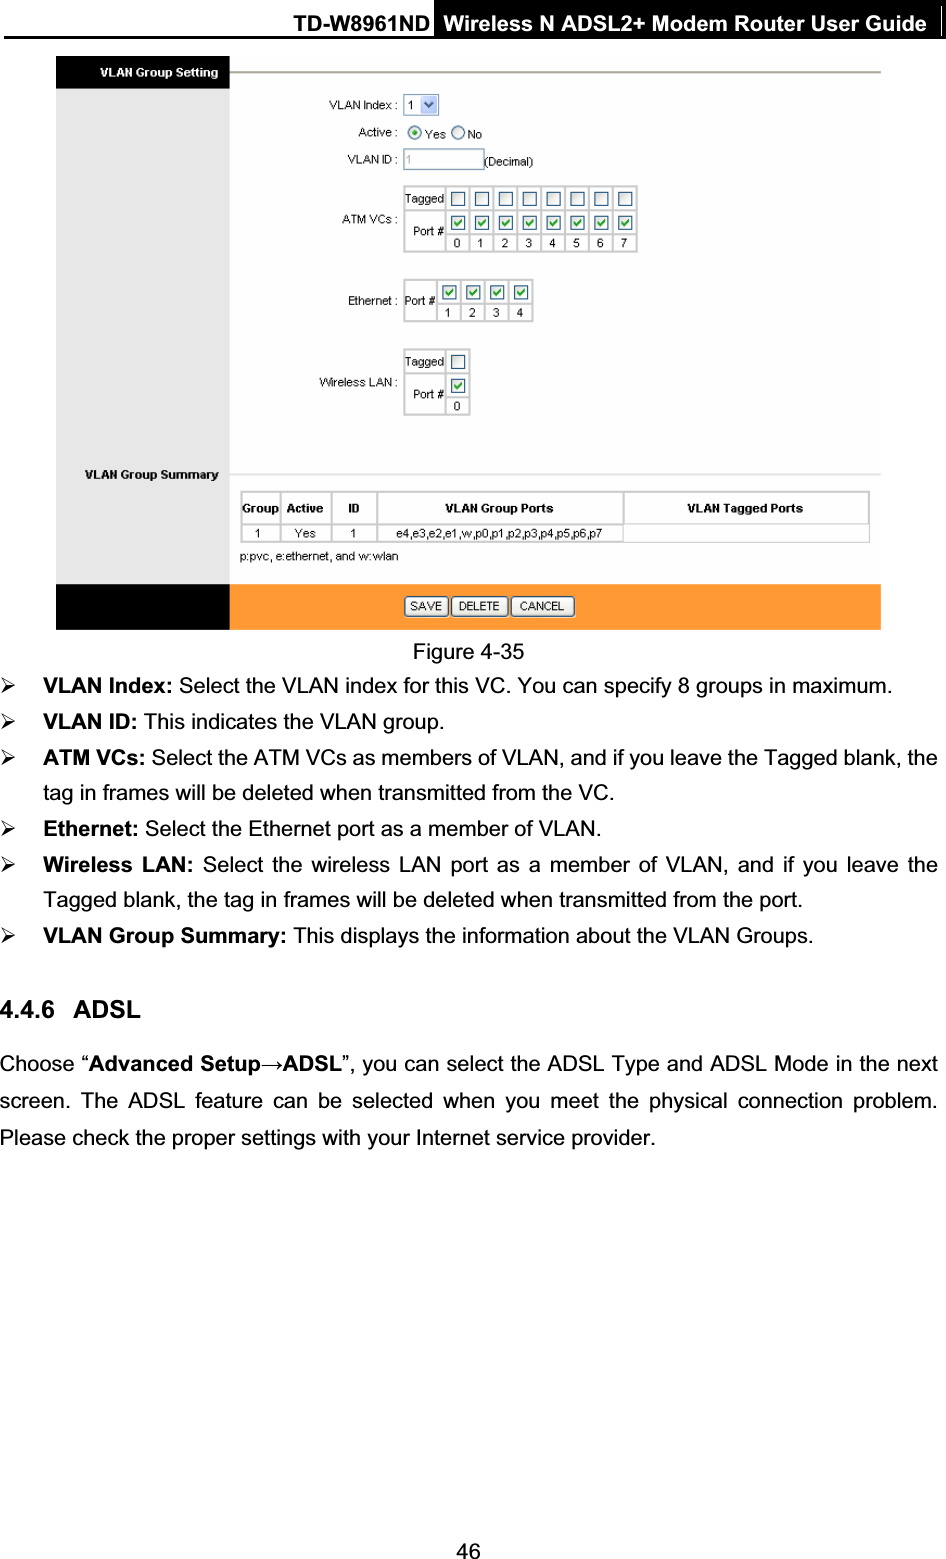 TD-W8961ND Wireless N ADSL2+ Modem Router User Guide46Figure 4-35 ¾VLAN Index: Select the VLAN index for this VC. You can specify 8 groups in maximum. ¾VLAN ID: This indicates the VLAN group. ¾ATM VCs: Select the ATM VCs as members of VLAN, and if you leave the Tagged blank, the tag in frames will be deleted when transmitted from the VC. ¾Ethernet: Select the Ethernet port as a member of VLAN. ¾Wireless LAN: Select the wireless LAN port as a member of VLAN, and if you leave the Tagged blank, the tag in frames will be deleted when transmitted from the port.¾VLAN Group Summary: This displays the information about the VLAN Groups. 4.4.6 ADSLChoose “Advanced SetupĺADSL”, you can select the ADSL Type and ADSL Mode in the next screen. The ADSL feature can be selected when you meet the physical connection problem. Please check the proper settings with your Internet service provider. 